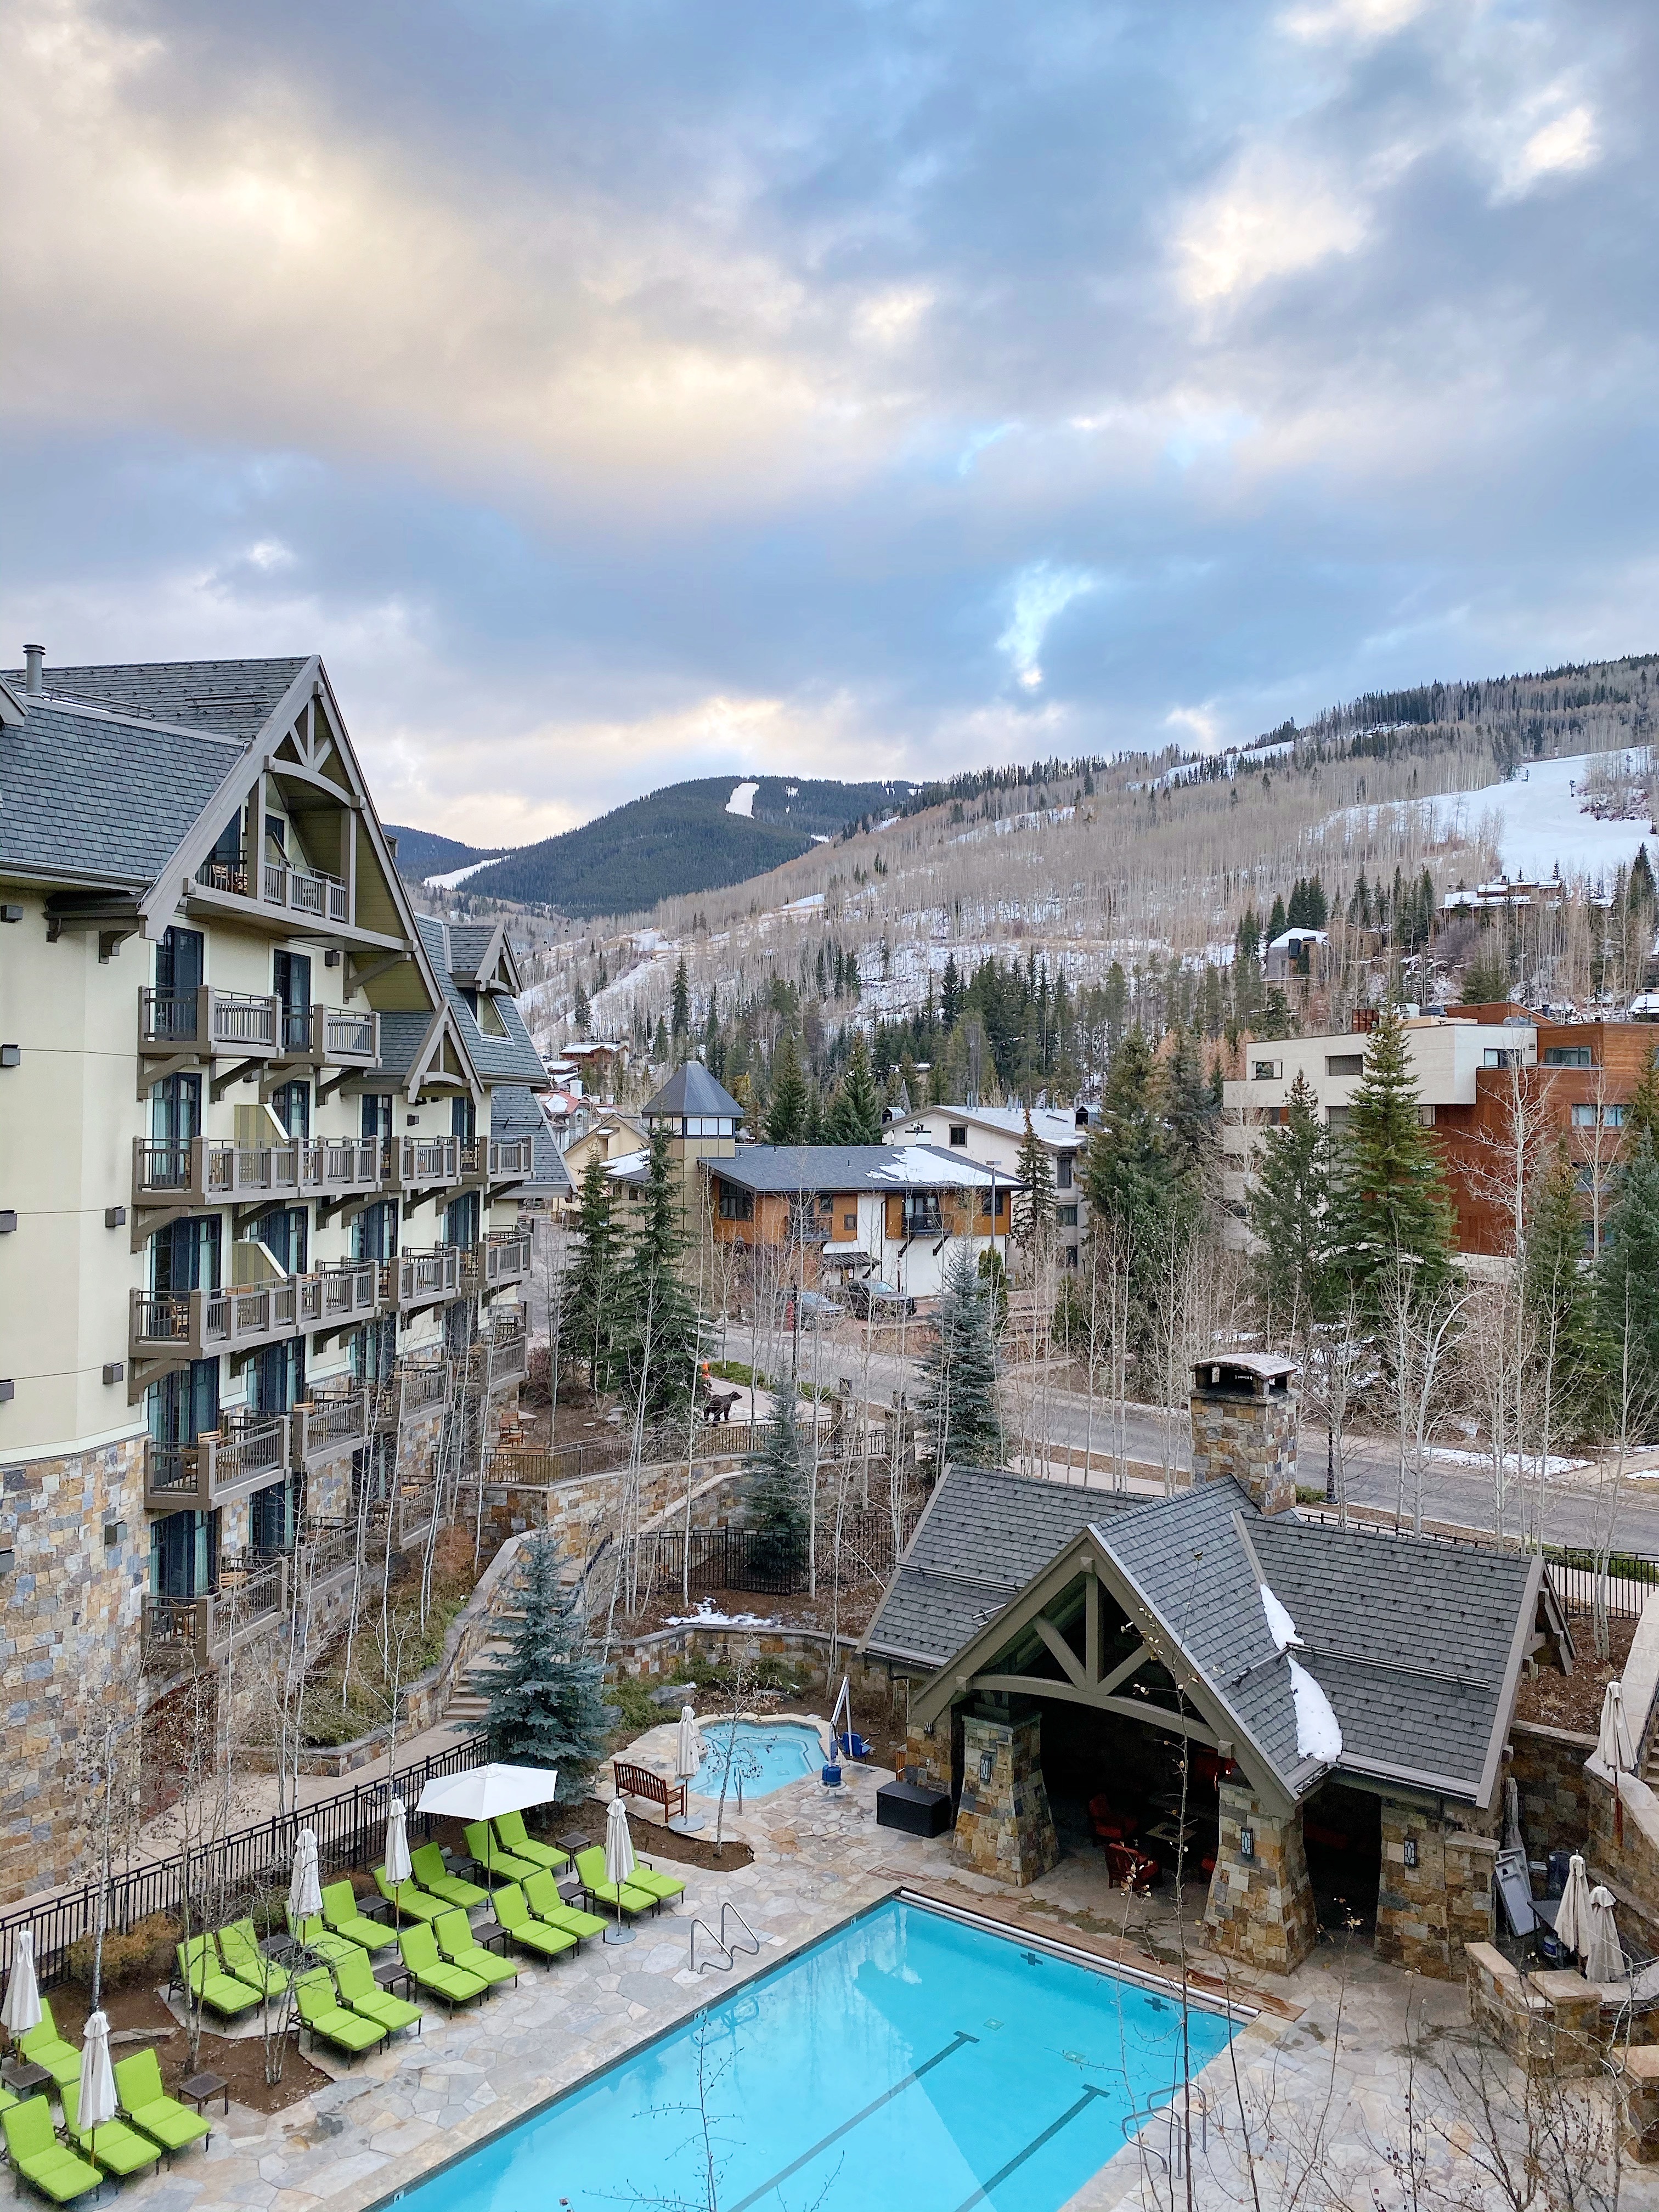 Our Stay At The Four Seasons Vail